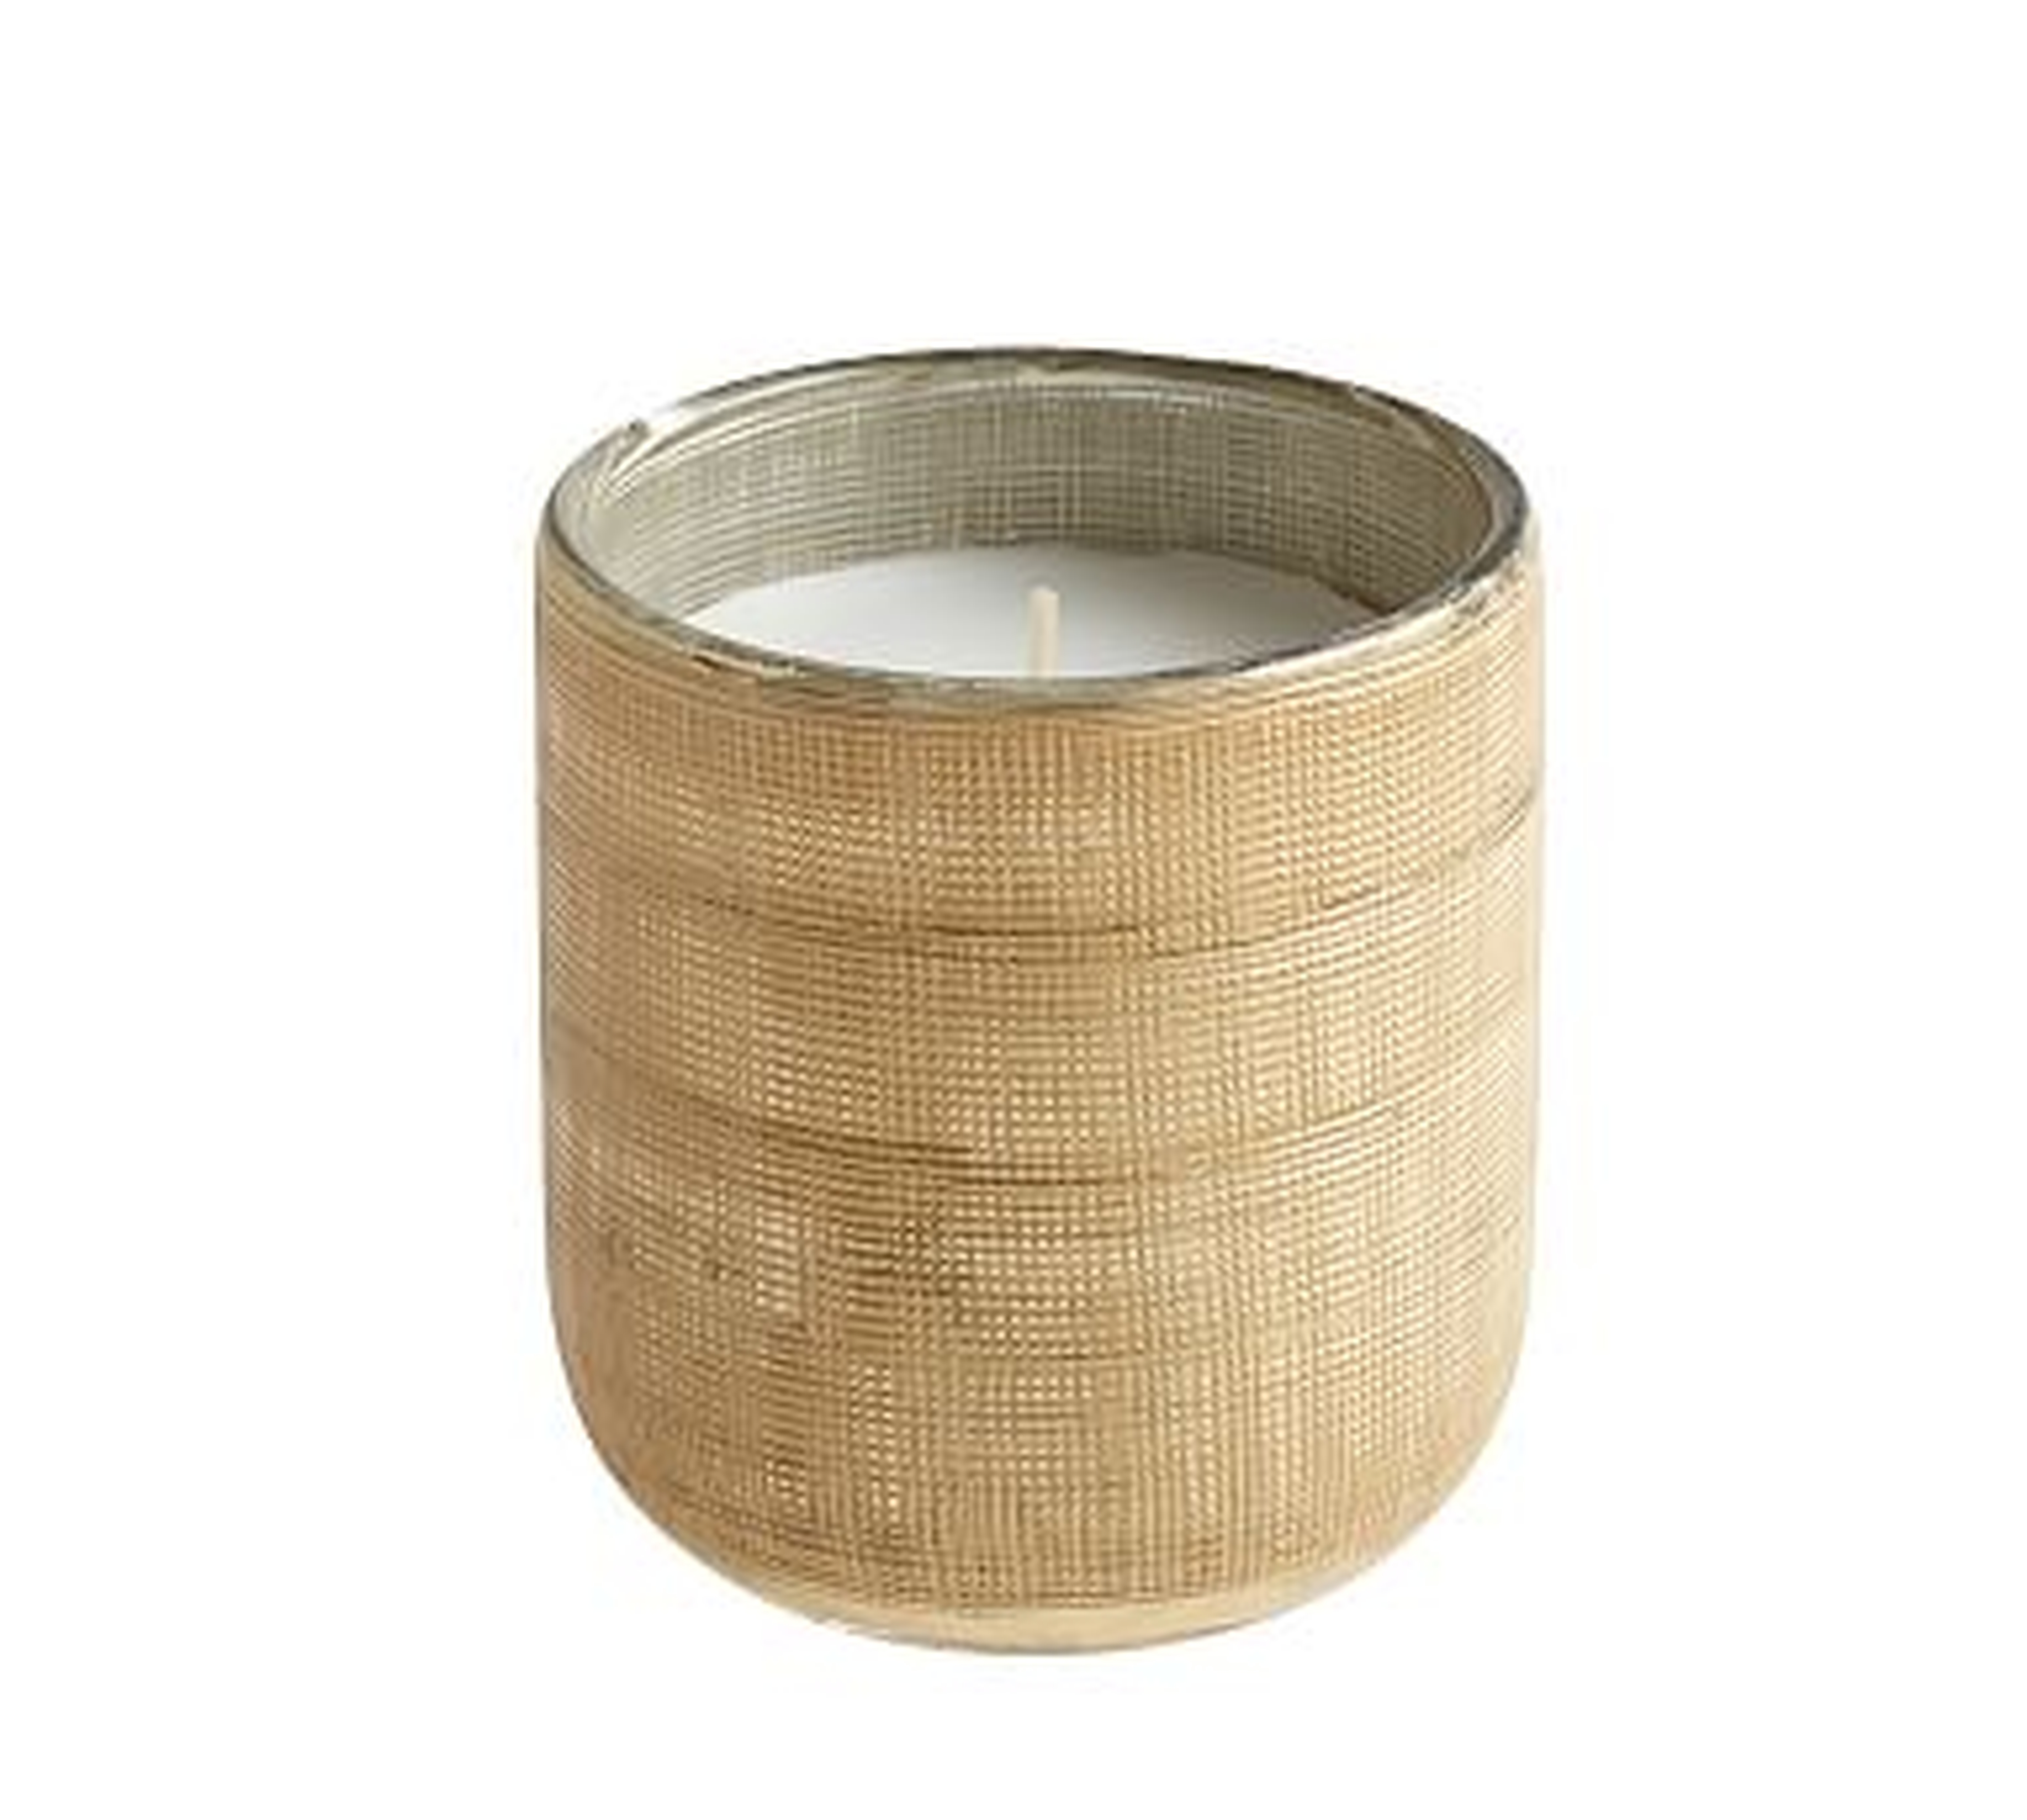 Linen Textured Mercury Glass Scented Candle, Gold, Small, Havana Tobacco - Pottery Barn